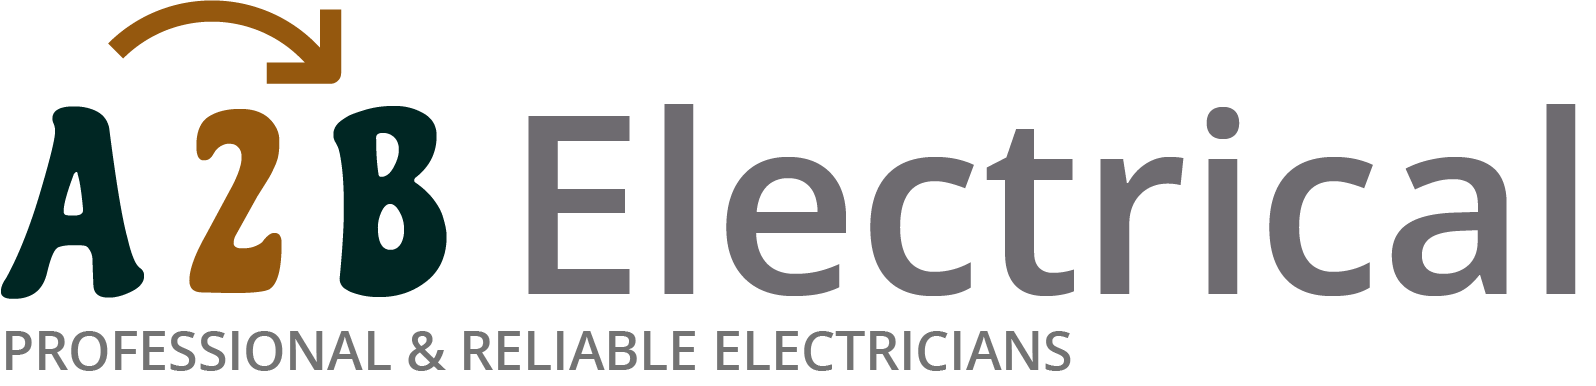 If you have electrical wiring problems in Windsor, we can provide an electrician to have a look for you. 